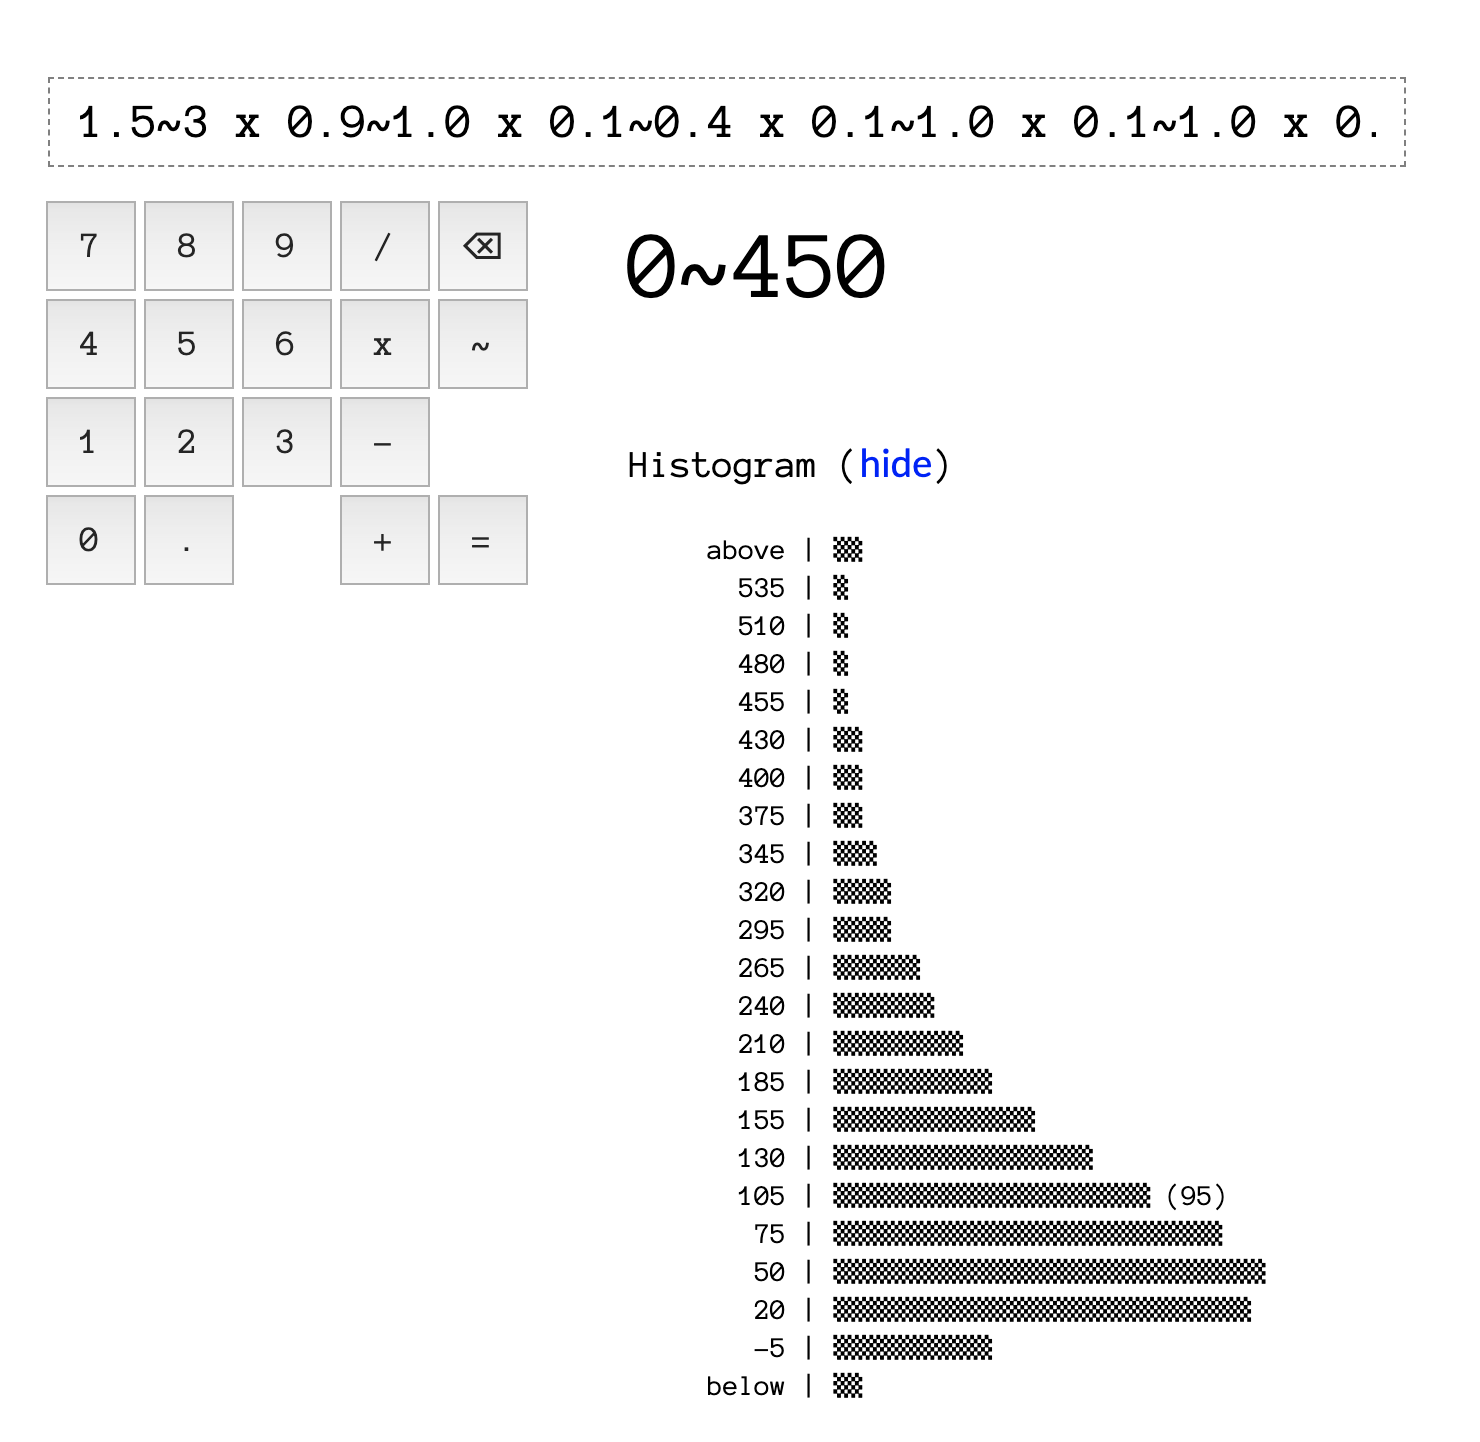 Results from the calculator, showing 0~450 and a histogram.